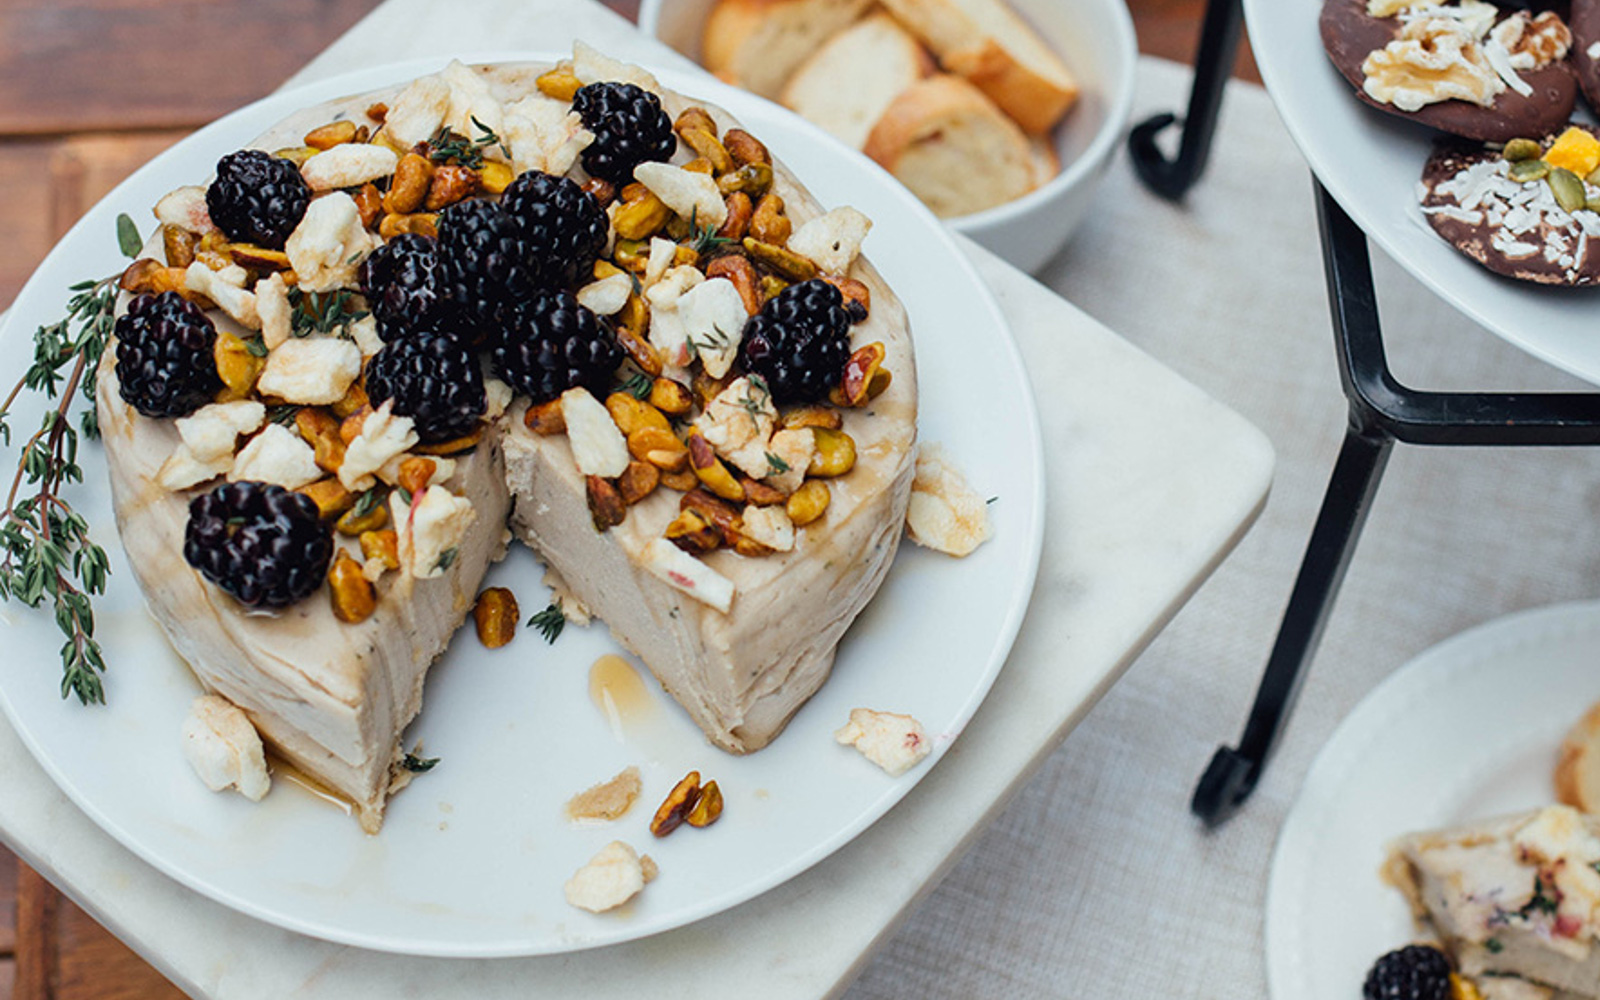 Cashew Brie to replace dairy